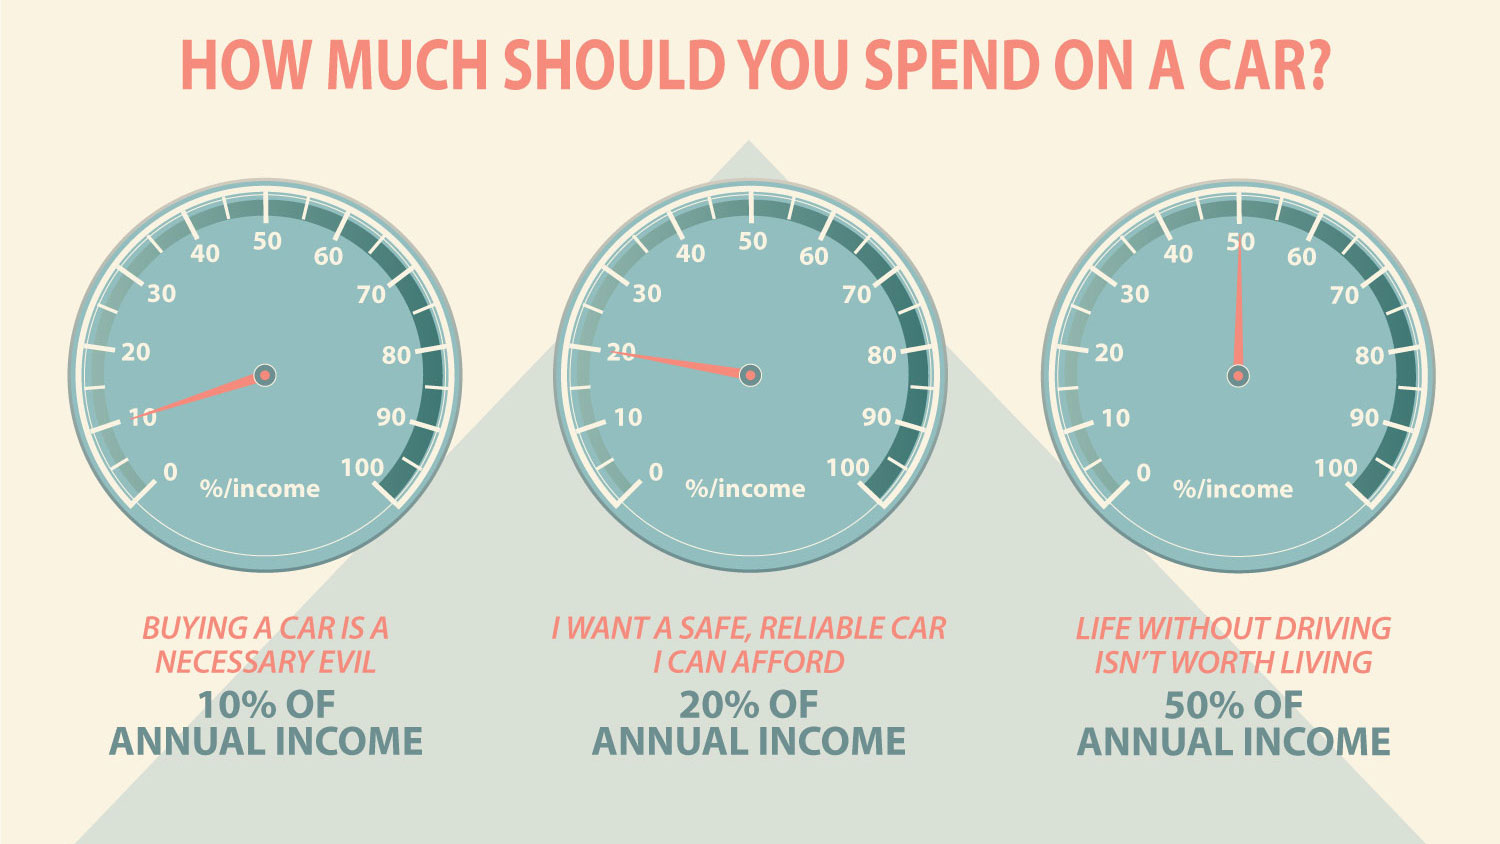 How much should you spend on a car